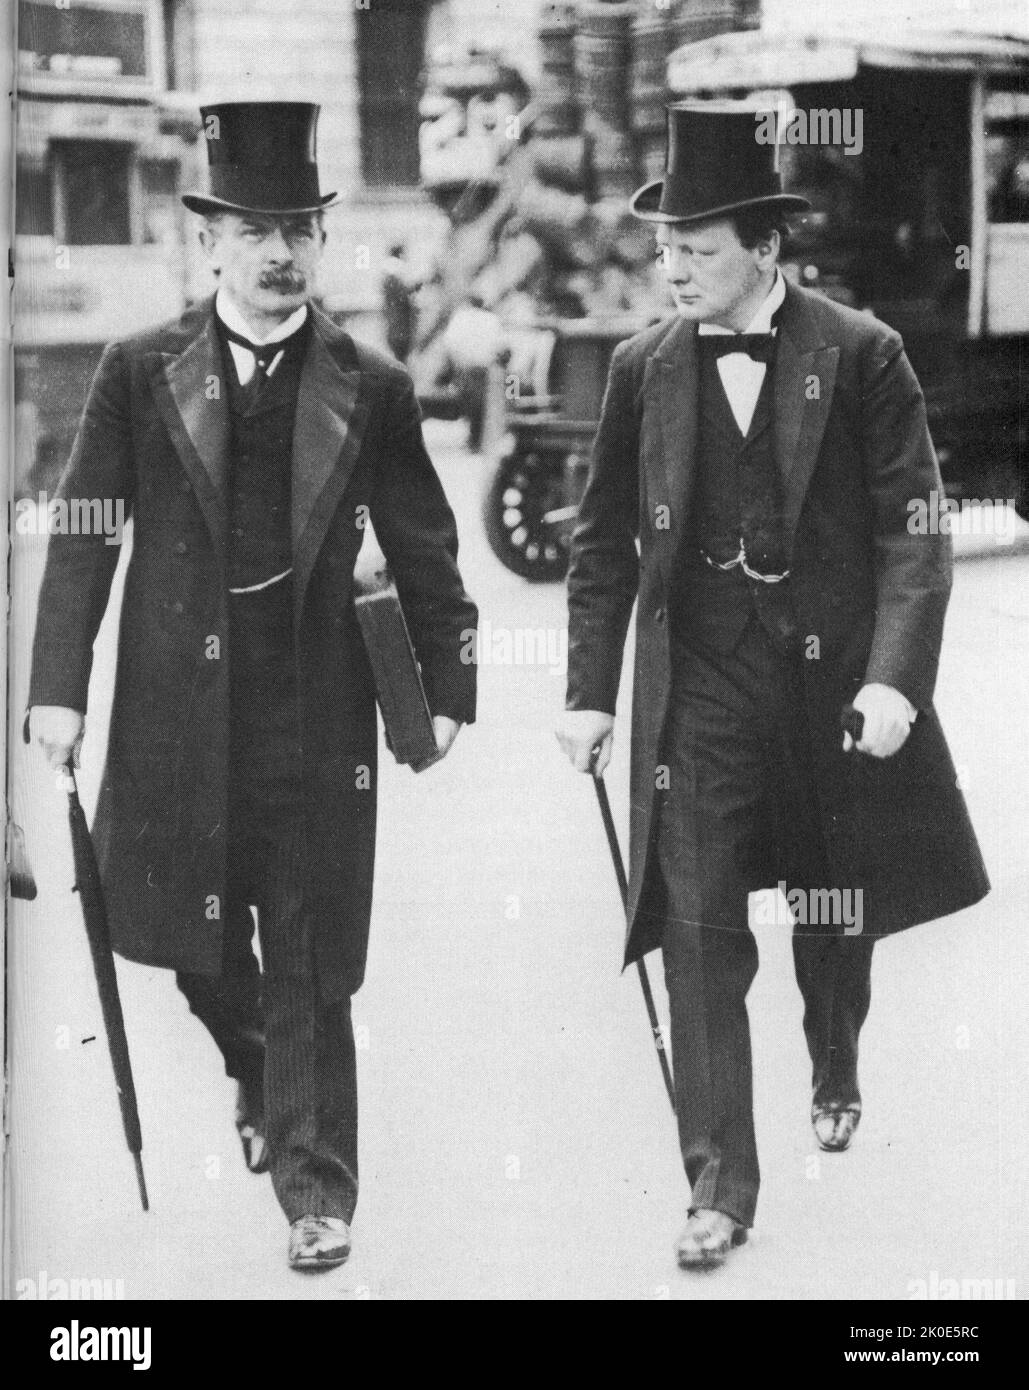 Future British Prime Ministers, David Lloyd George and Winston Churchill in 1907 during the peak of their 'radical phase' as social reformers. Stock Photo